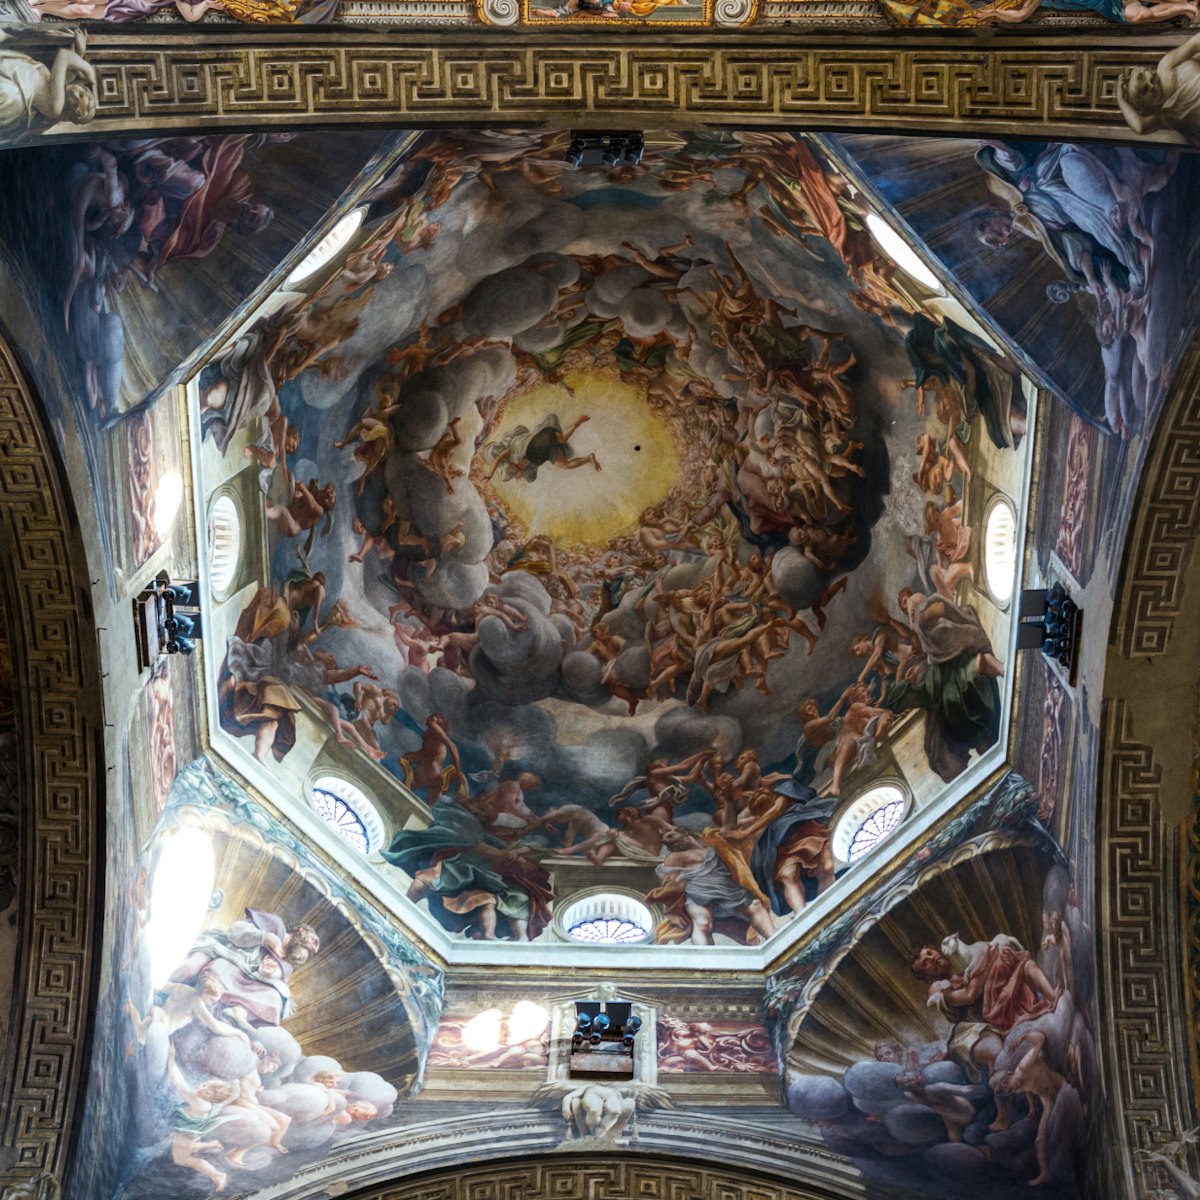 Parma, the Basilica Cathedra inside, view of the dome with the fresco of the Assumption of the Virgin executed by Correggio